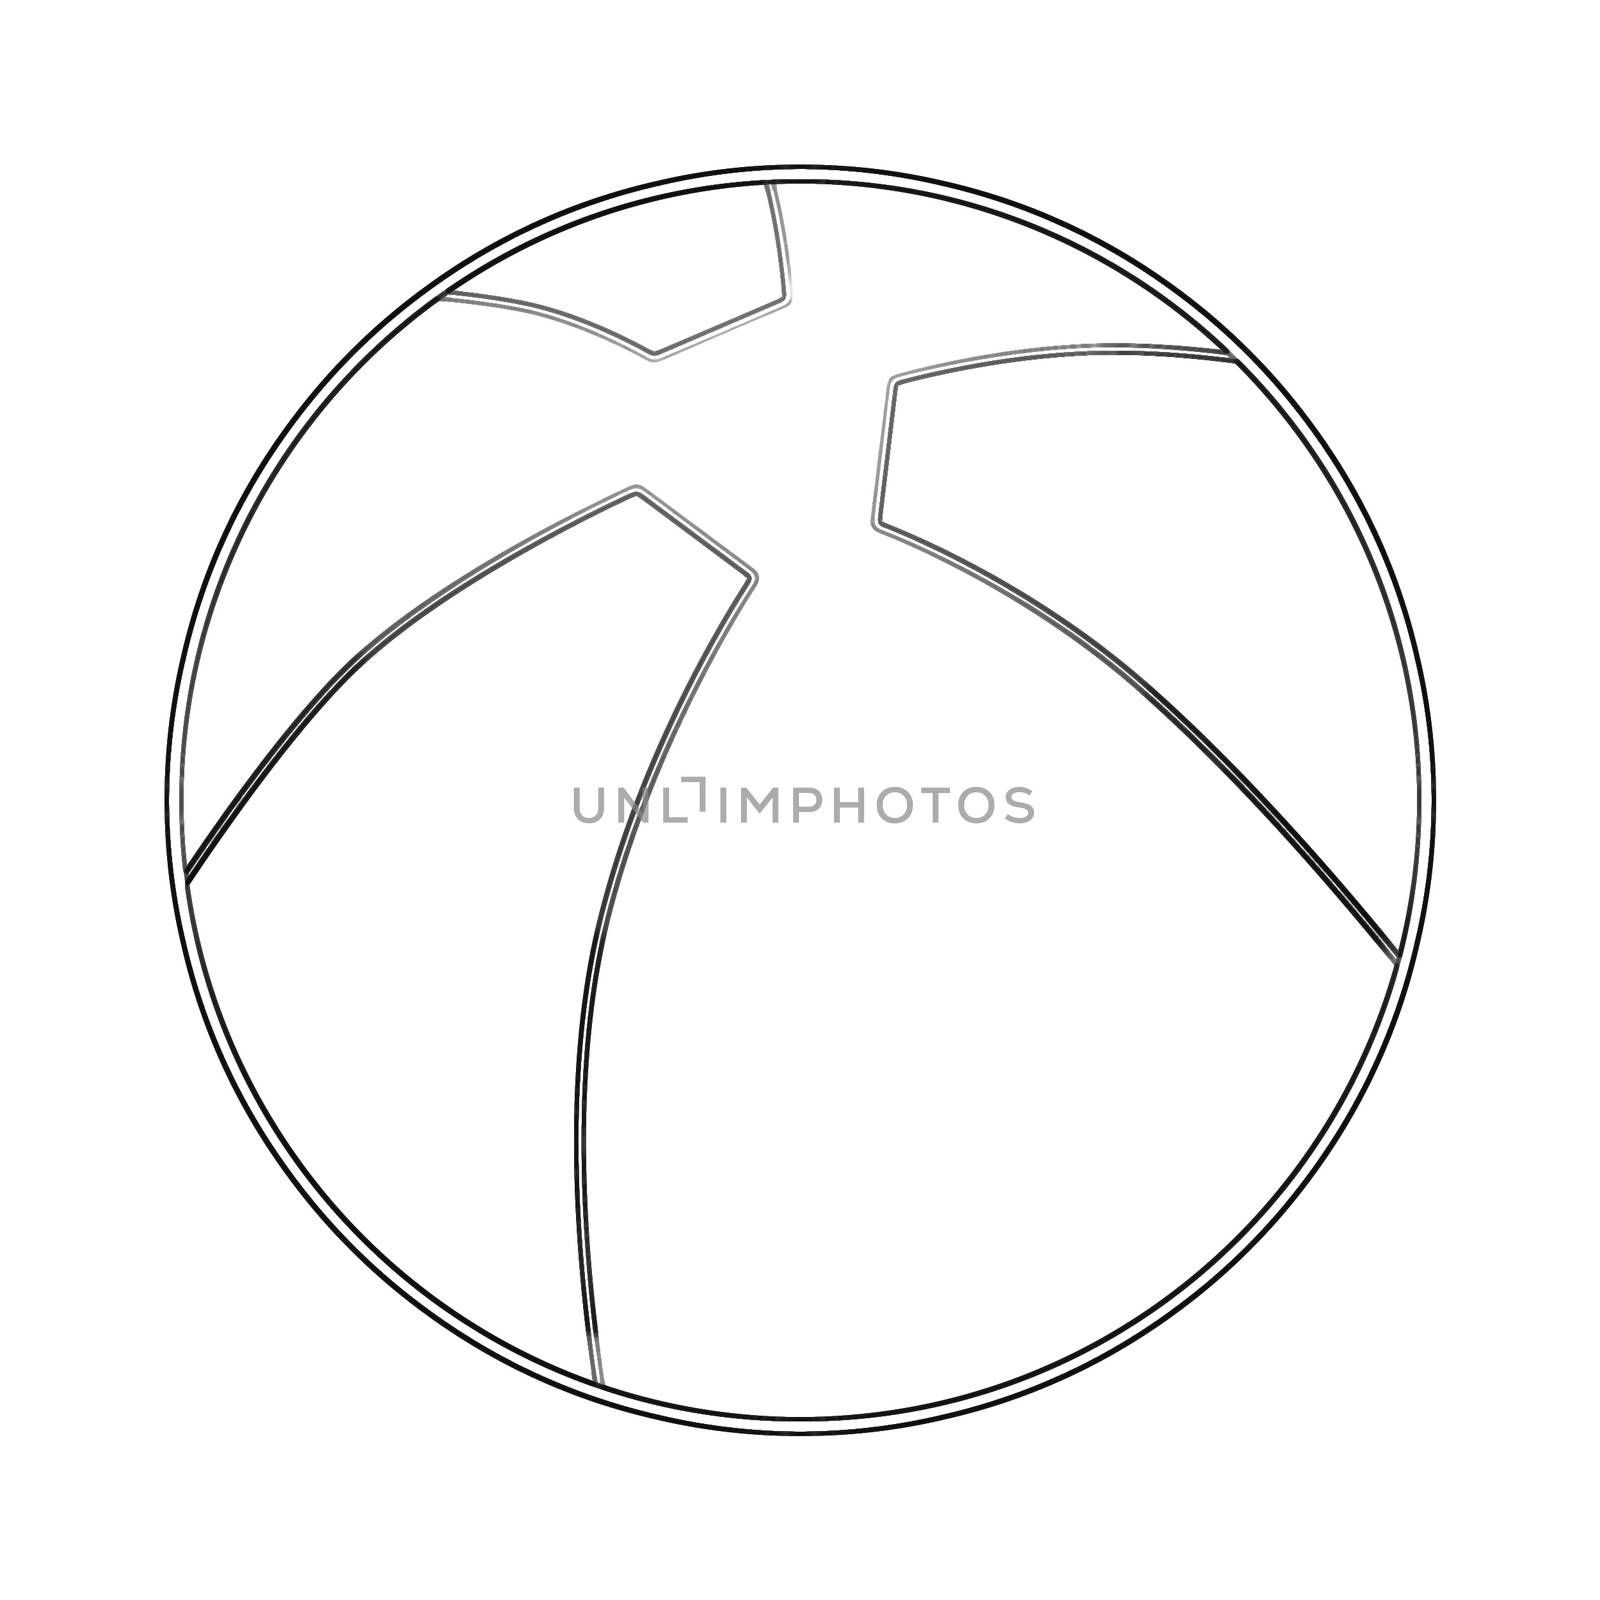 Illustration: Coloring Book Series: Sport Ball: Beach Volleyball. Soft thin line. Print it and bring it to Life with Color! Fantastic Outline / Sketch / Line Art Design. by NextMars